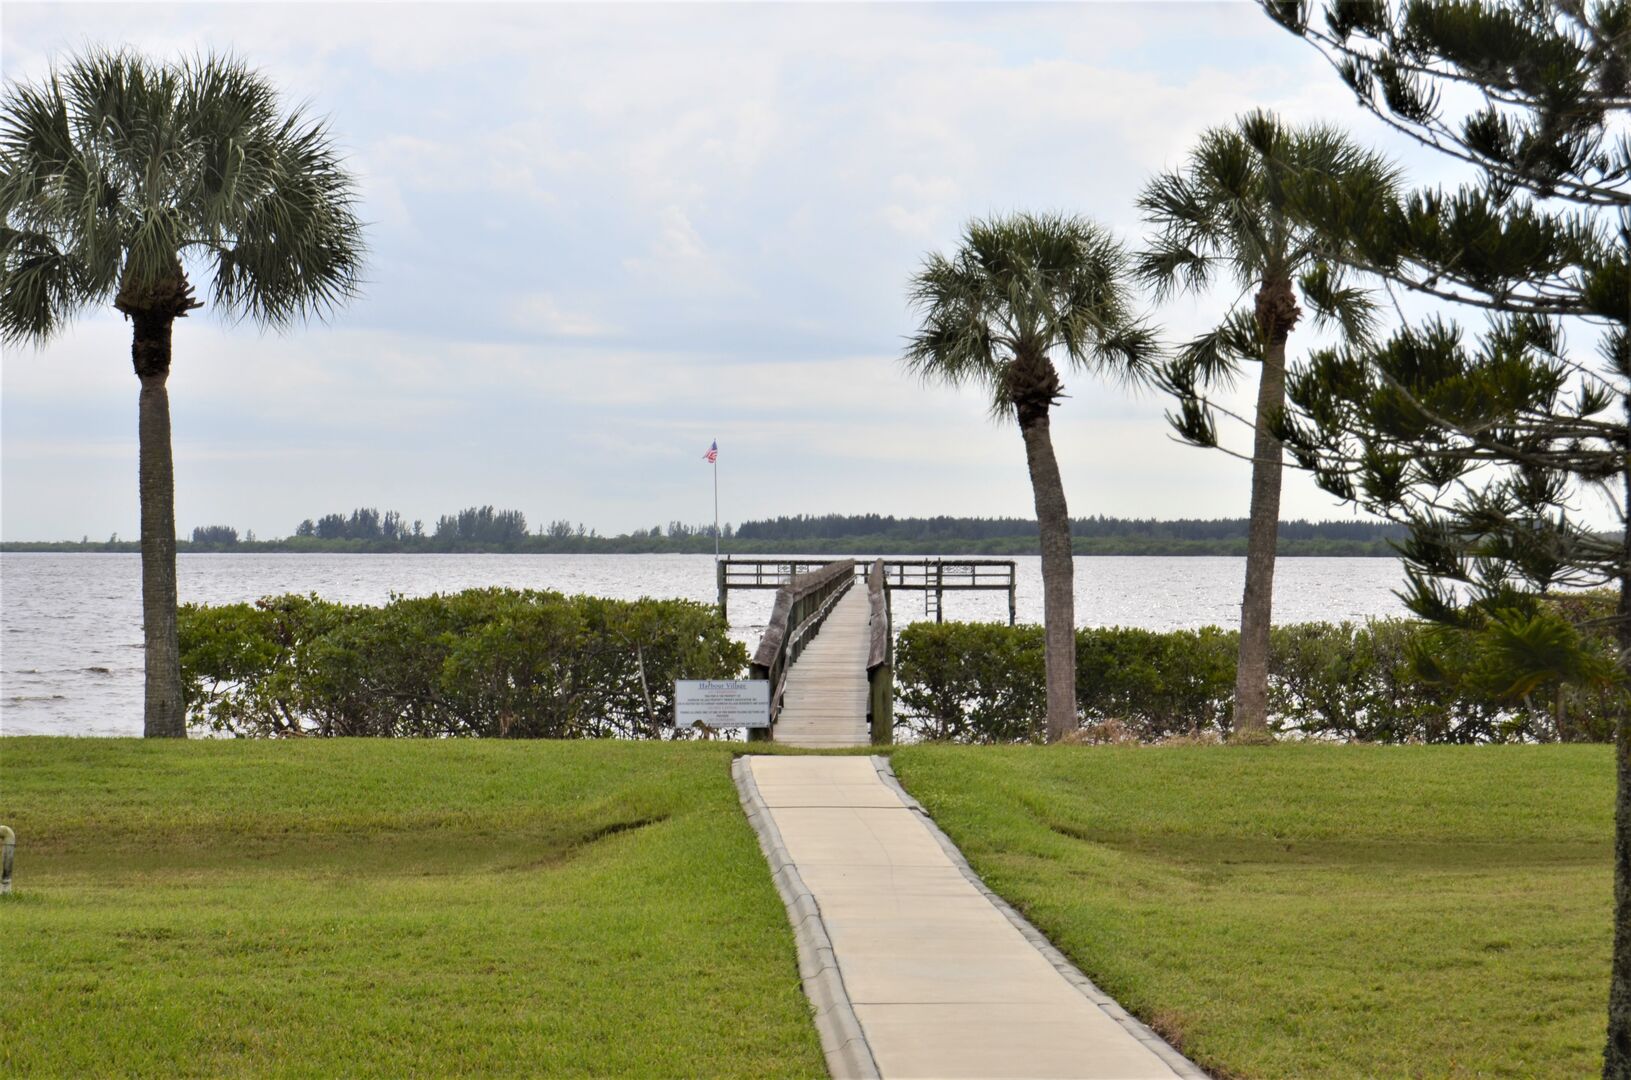 Resort access to the pier on the Myakka River